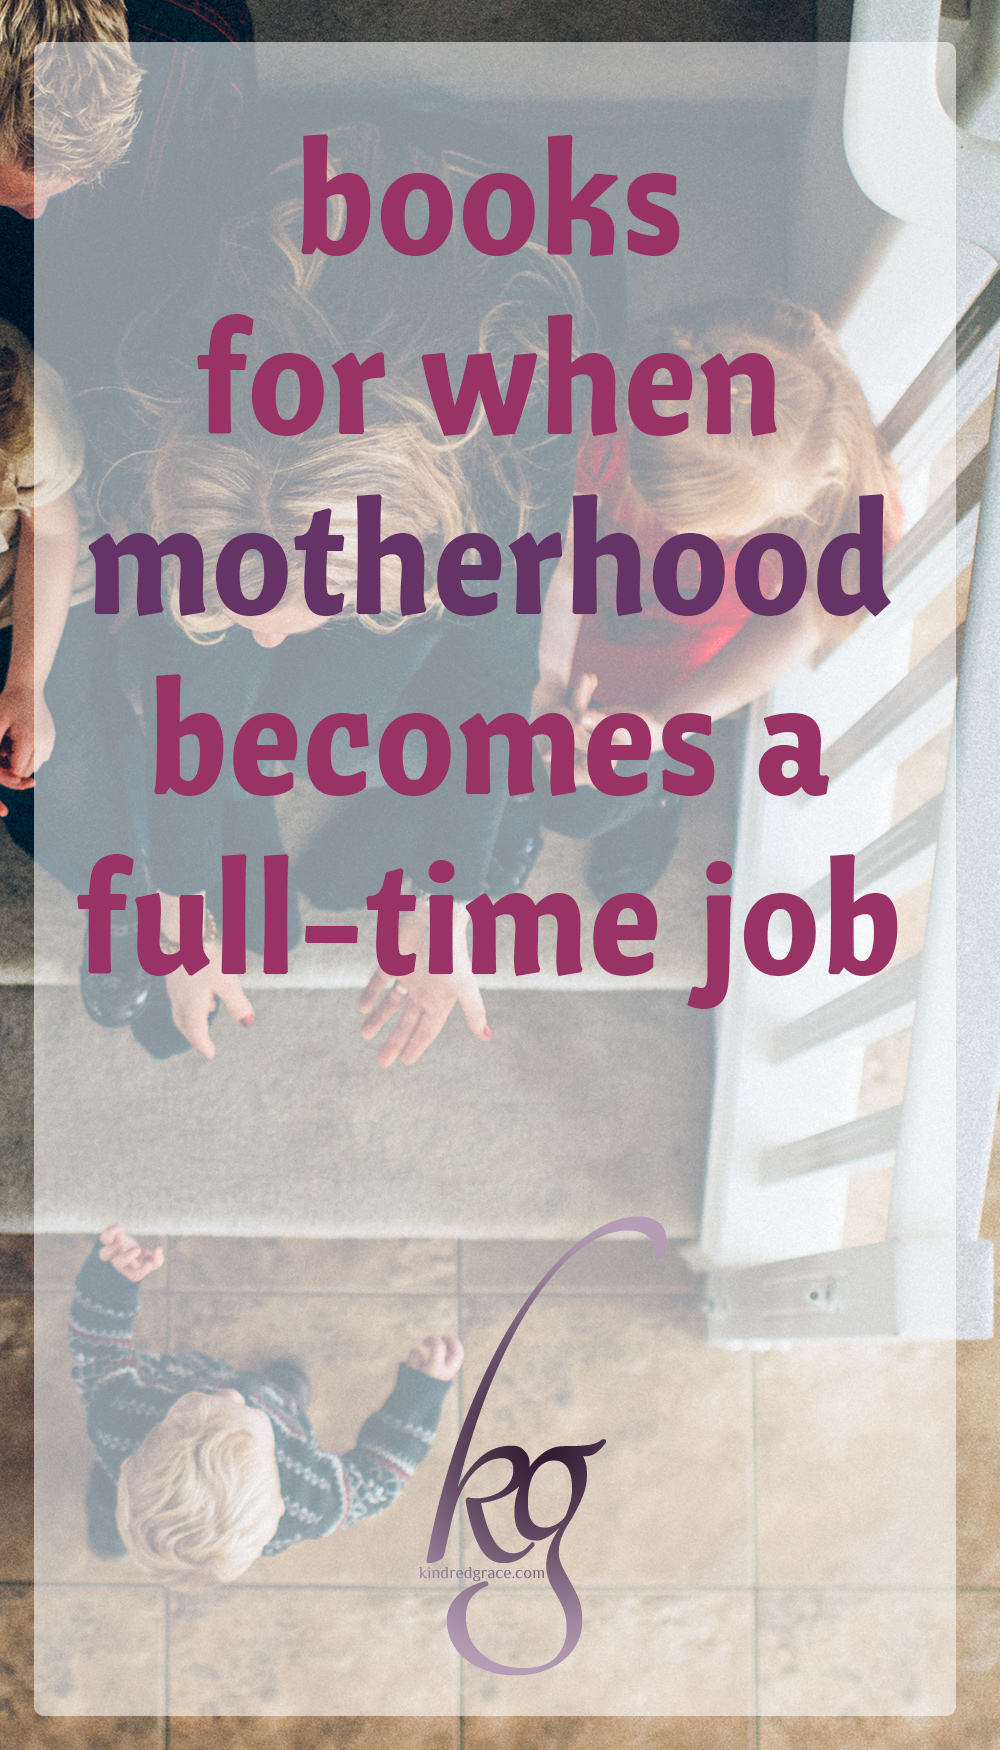 When I hit what I call "full-time motherhood", I headed to the nonfiction shelf for some answers. I'd been skipping over recommended reads in favor of fiction for too long.